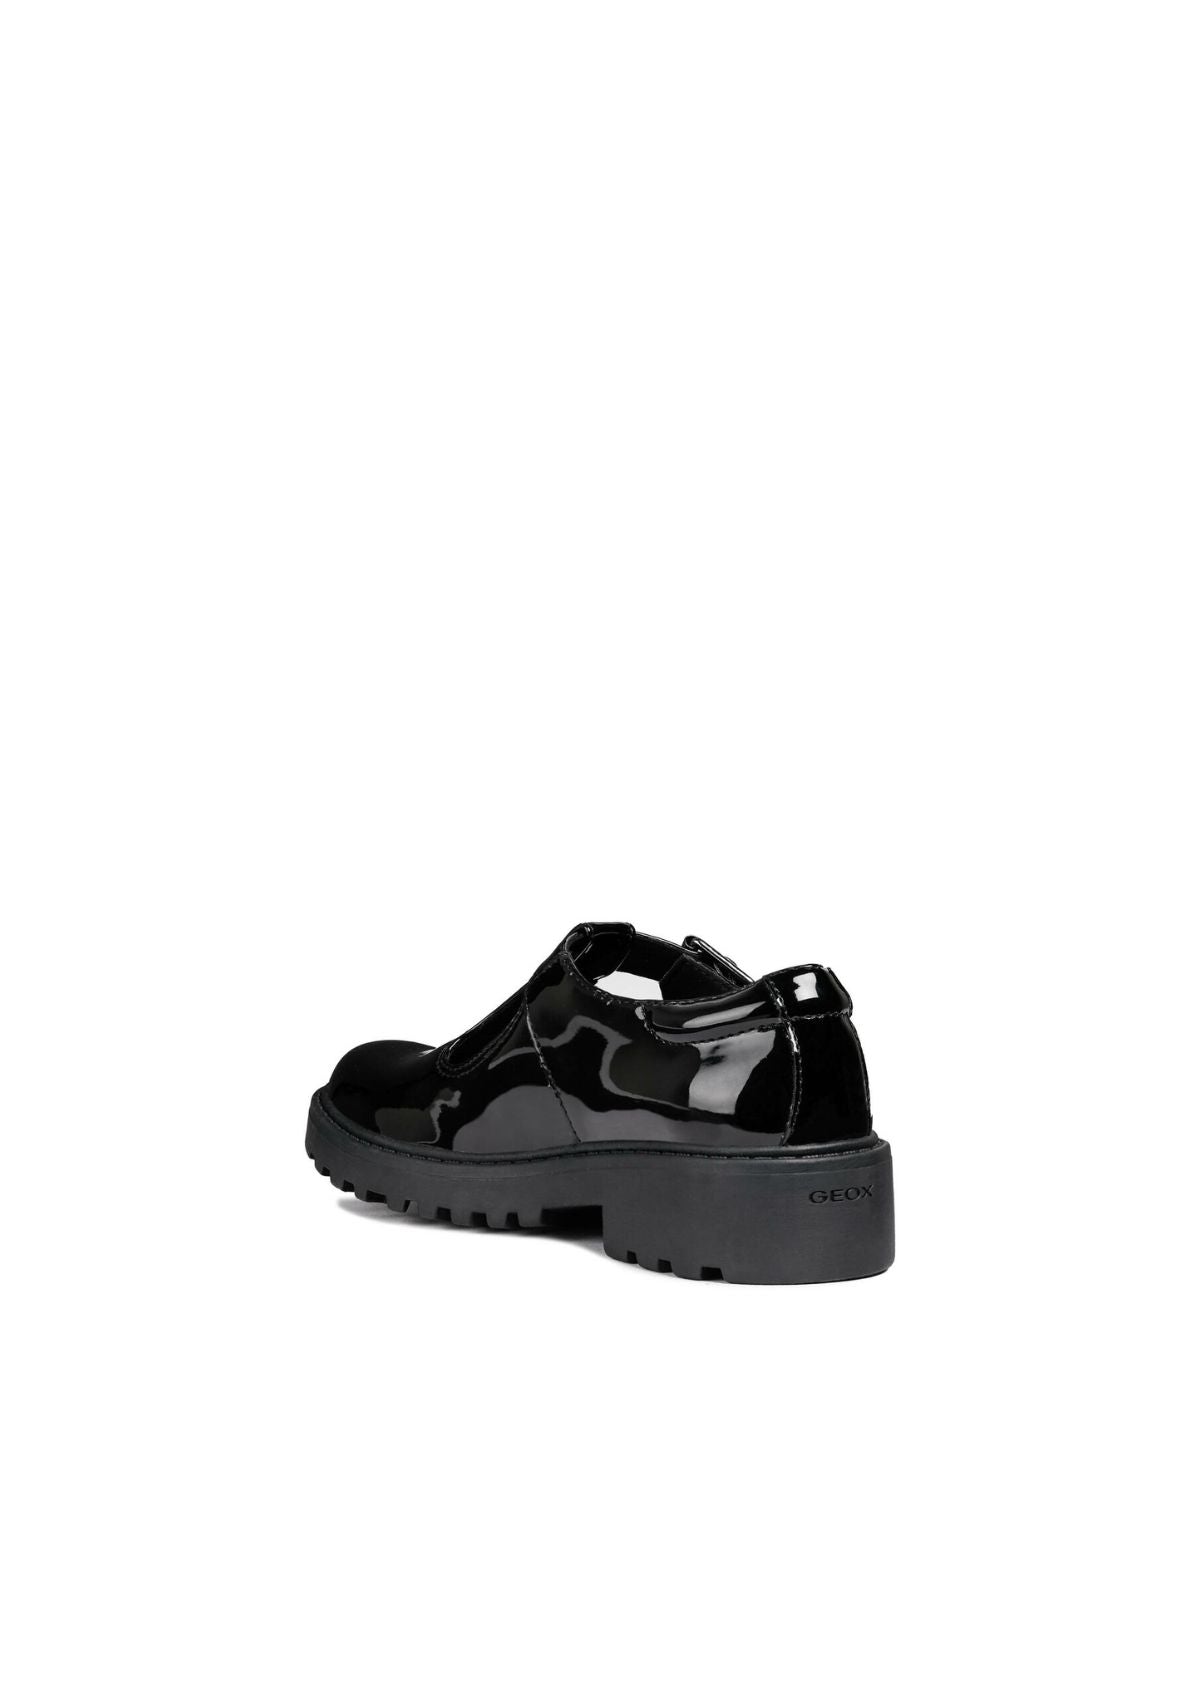 Geox Girls School Shoes CASEY Black Patent Buckle back